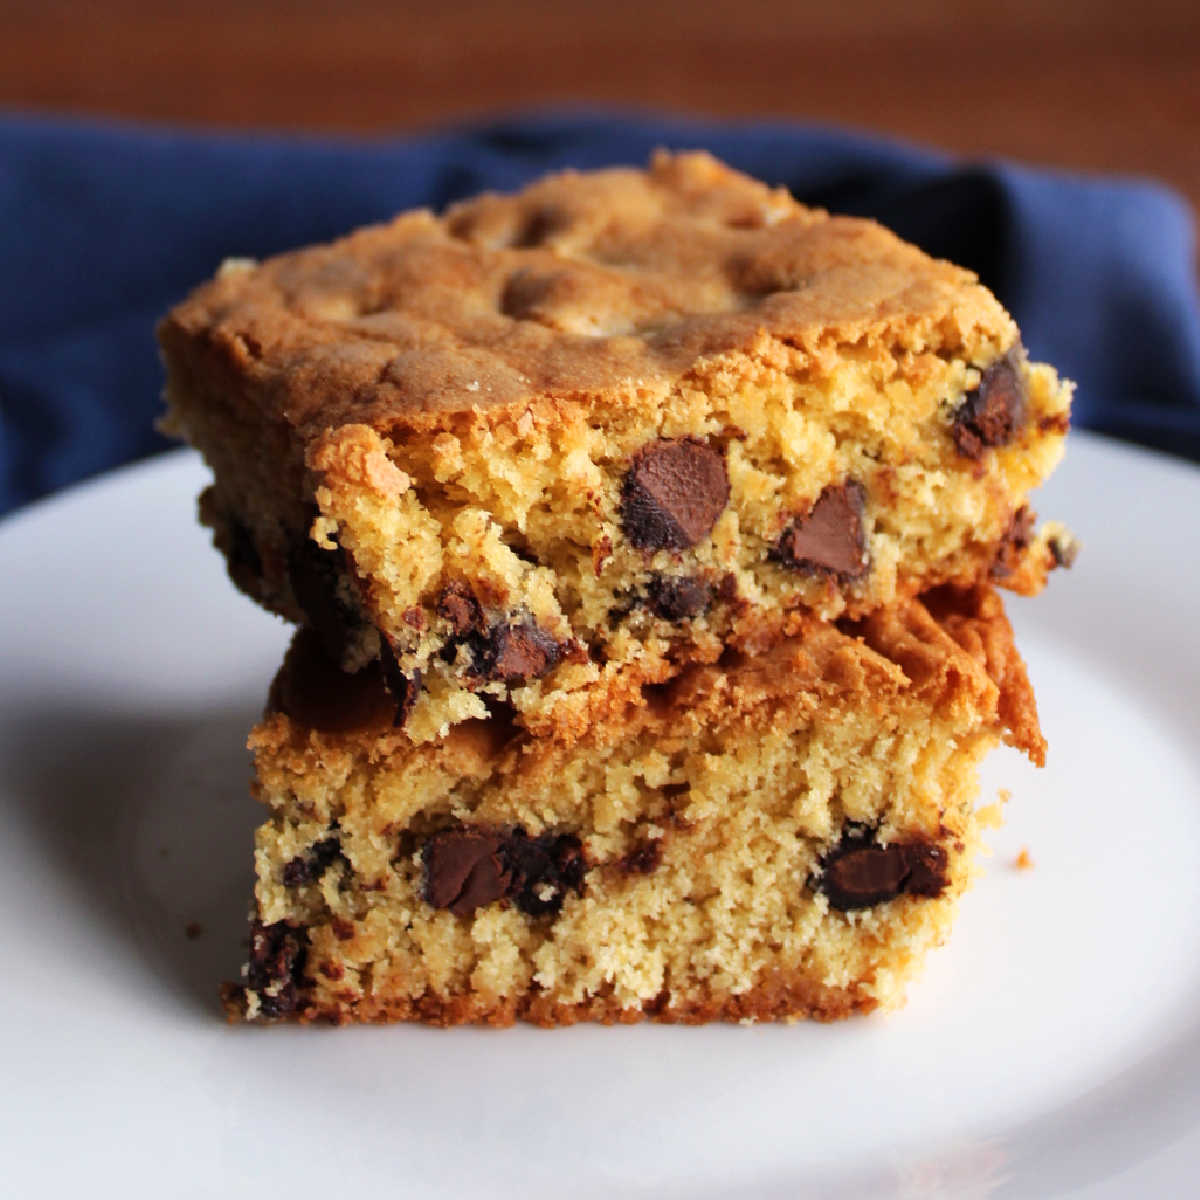 Two pieces of brown sugar bars stacked on top of each other showing the soft texture and the chocolate chips inside.